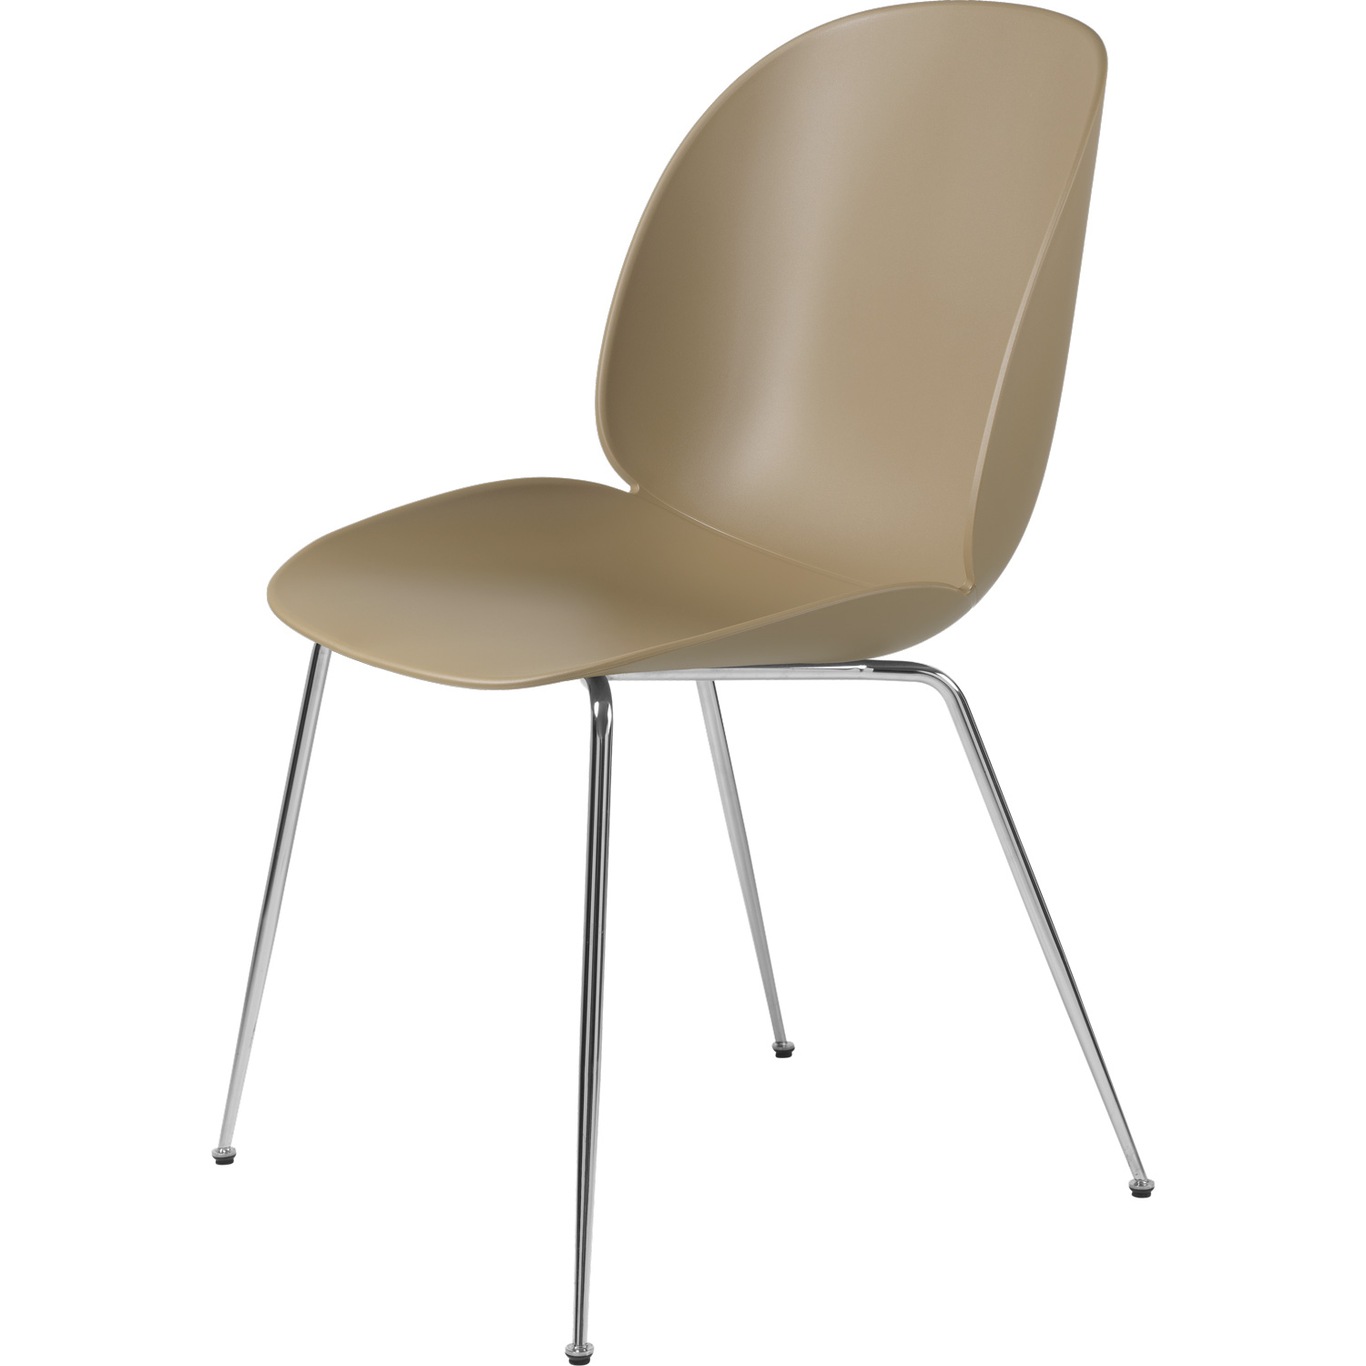 Beetle Chair Un-upholstered Conic Base Chrome, Pebble Brown